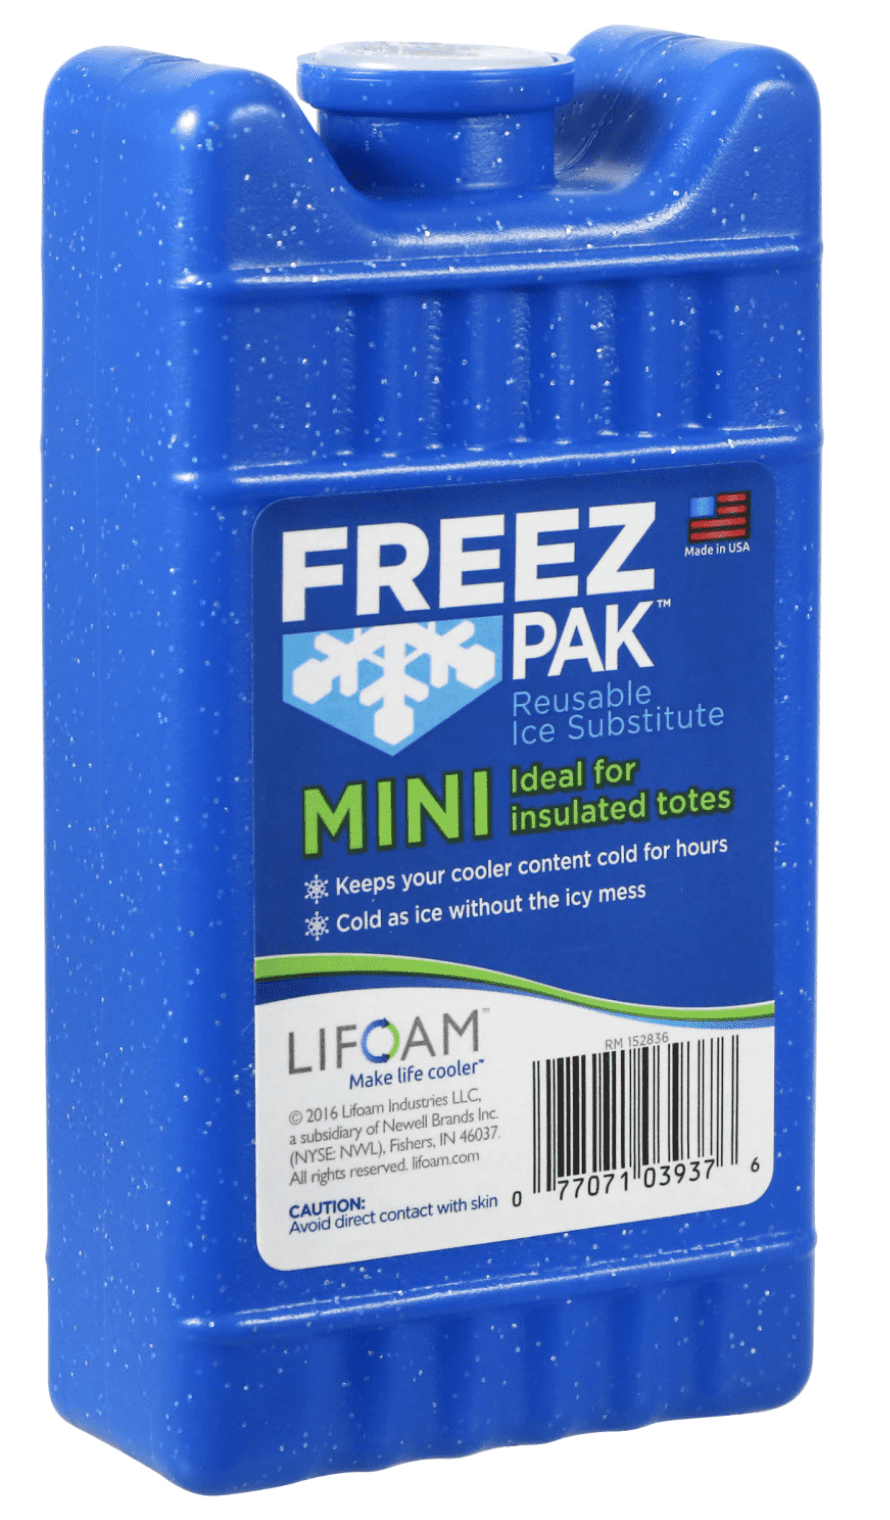 Ice Pack - Ice packs for coolers - Includes: 4 Ice Pack size Mini